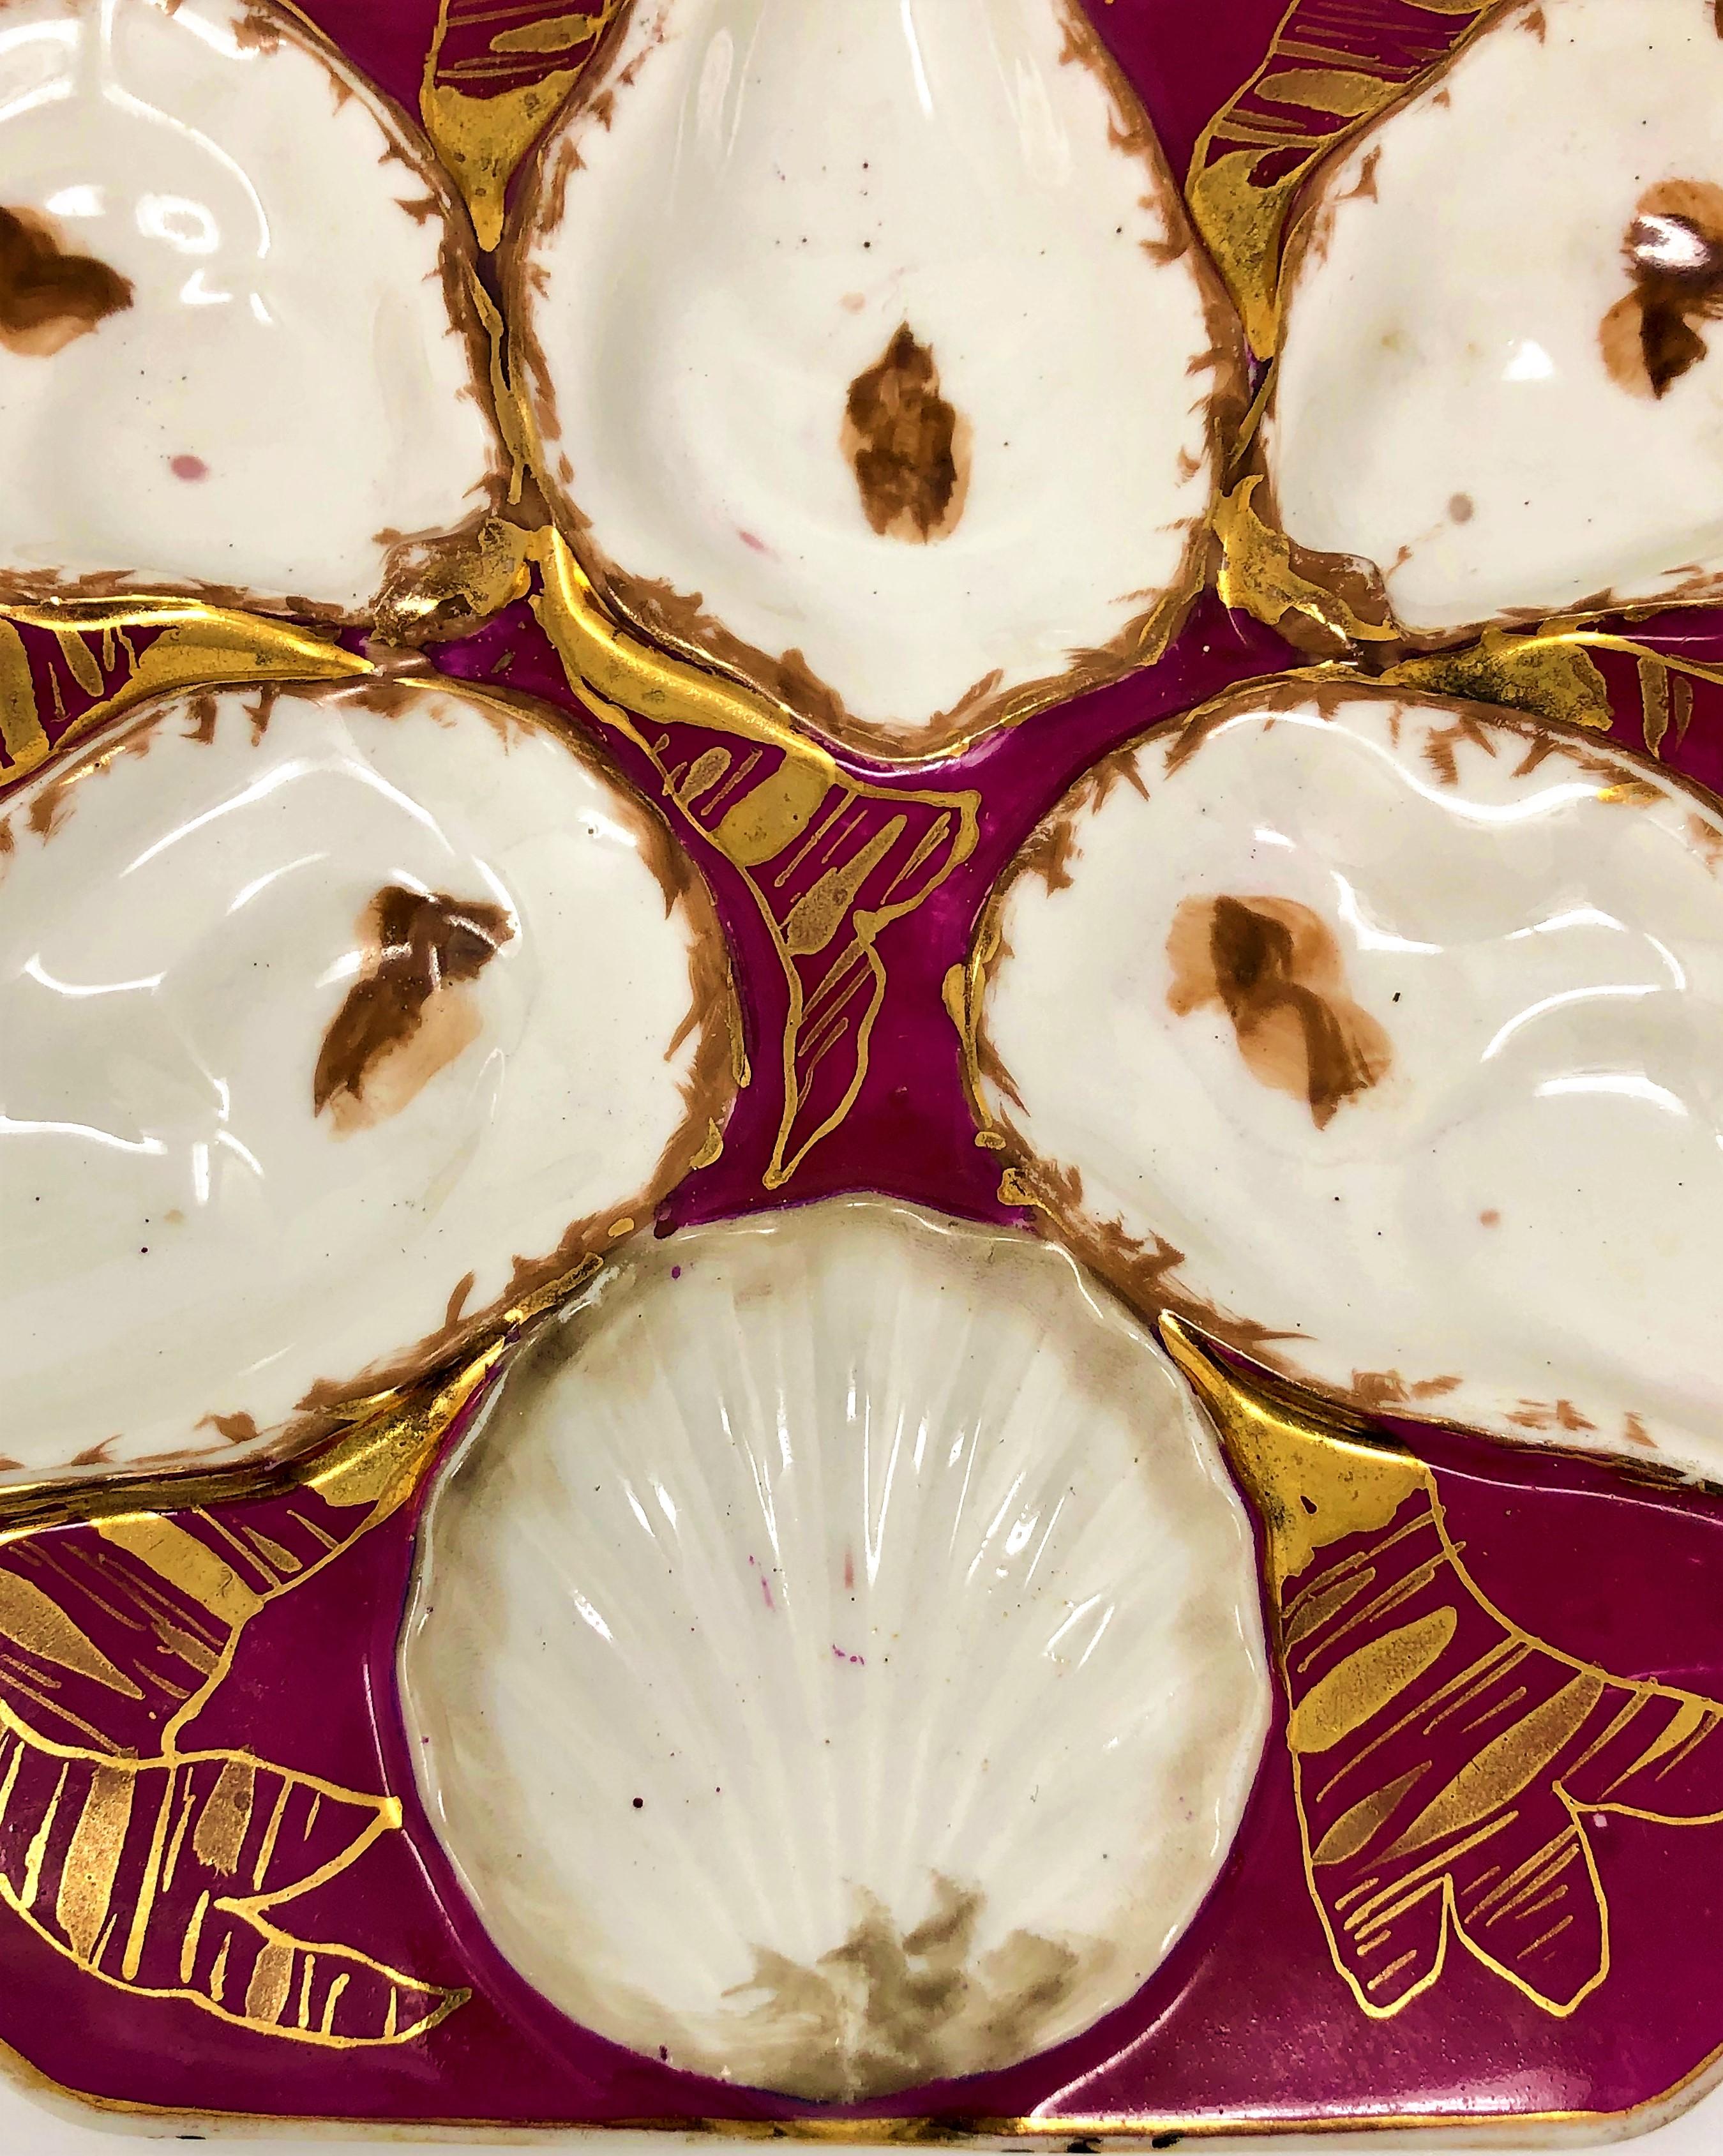 Antique Continental hand painted porcelain oyster plate, circa 1880-1890.